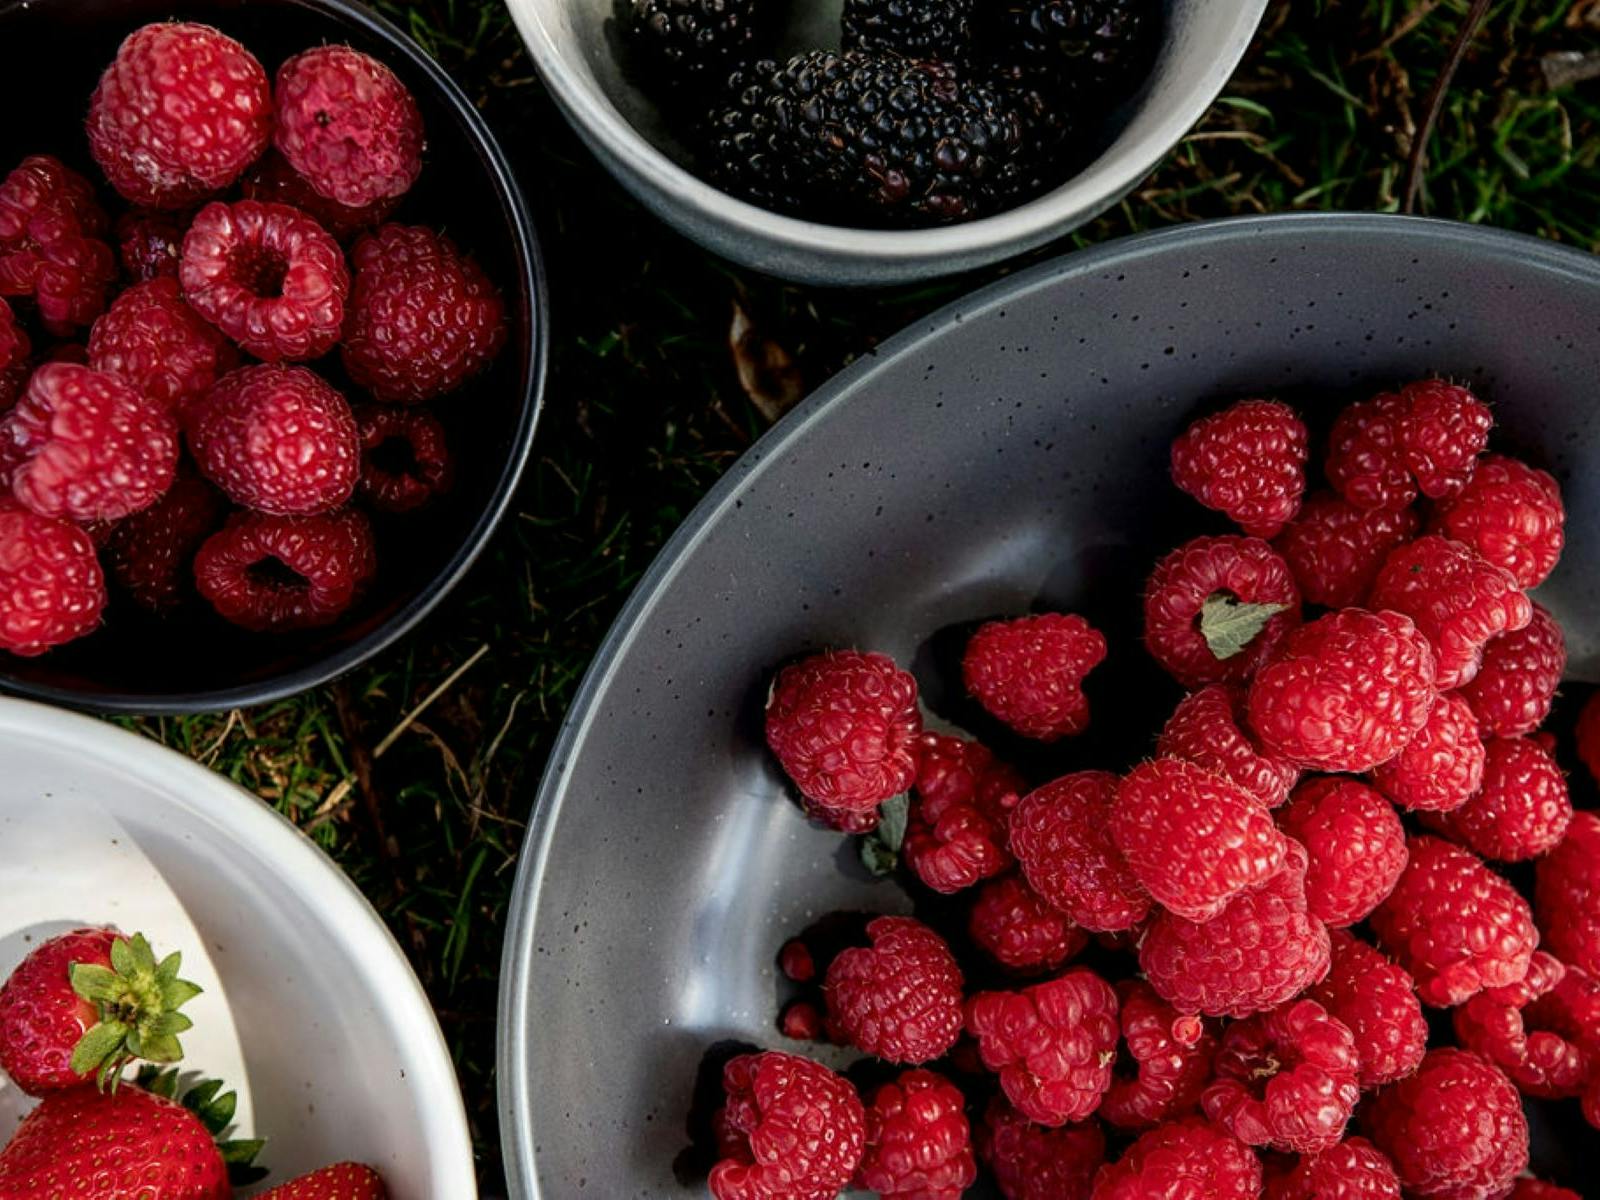 Fresh berries available in season, frozen berries available in the cooler months.